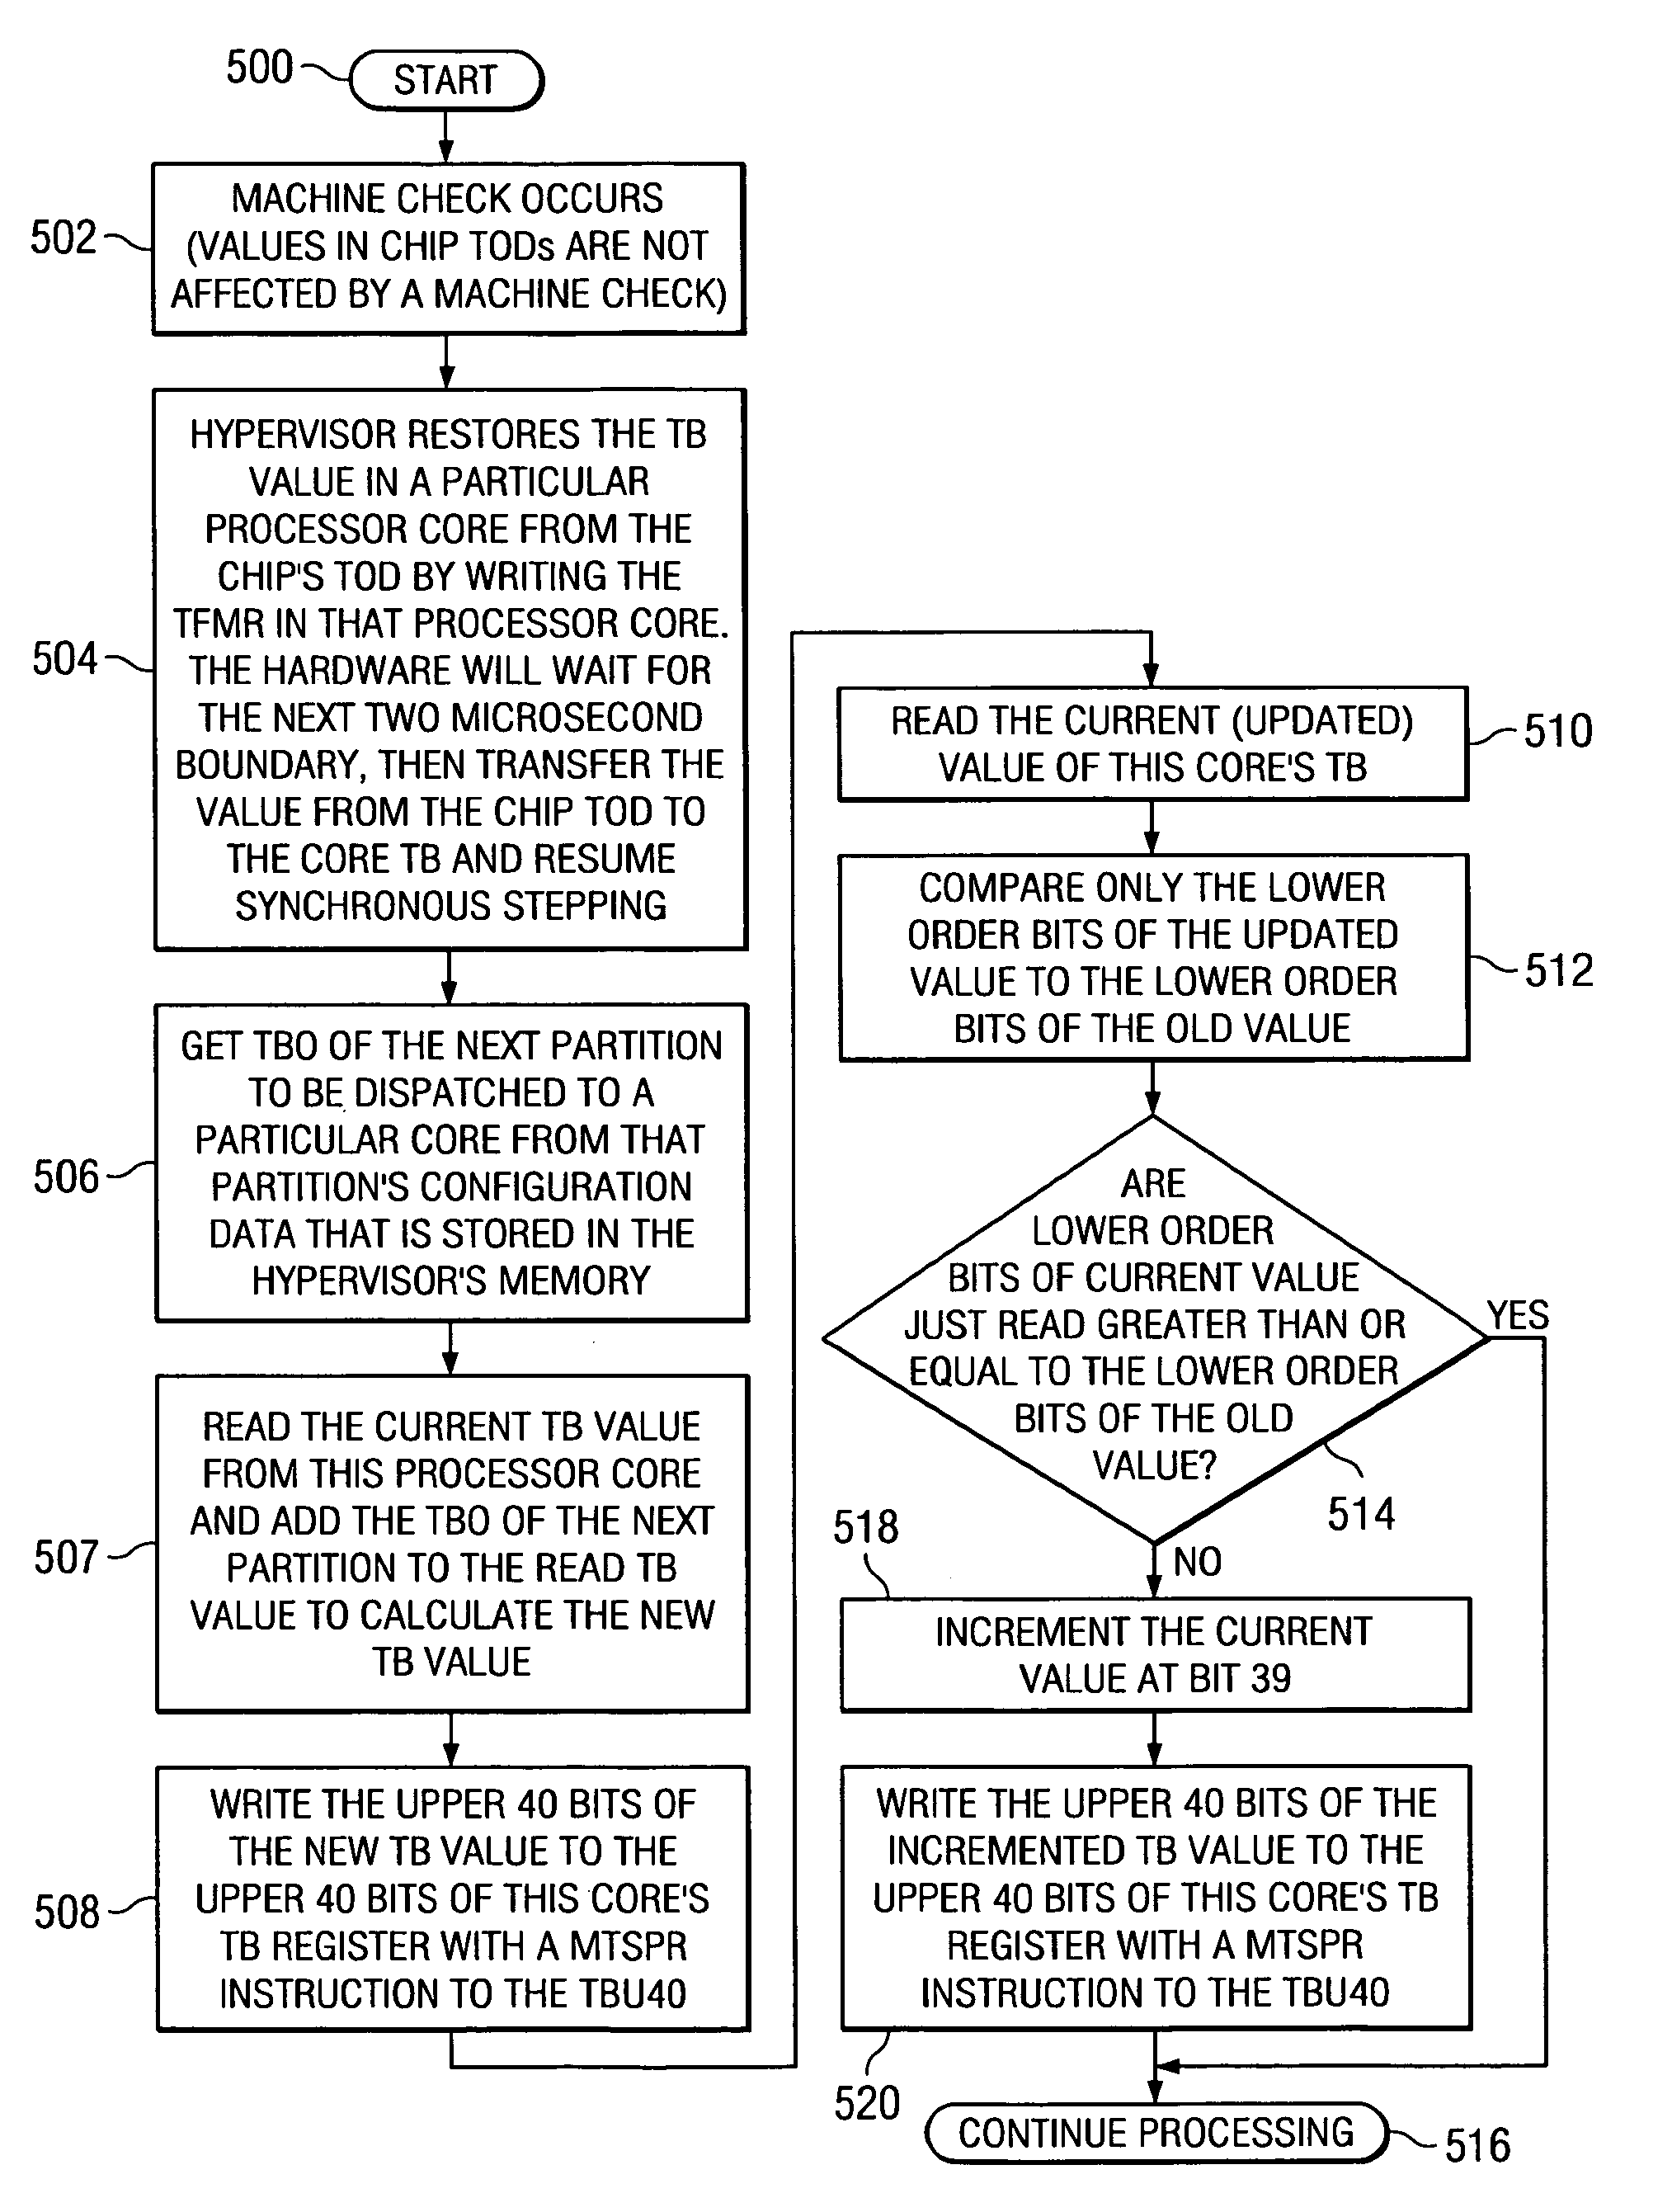 Method, apparatus, and product for an efficient virtualized time base in a scaleable multi-processor computer